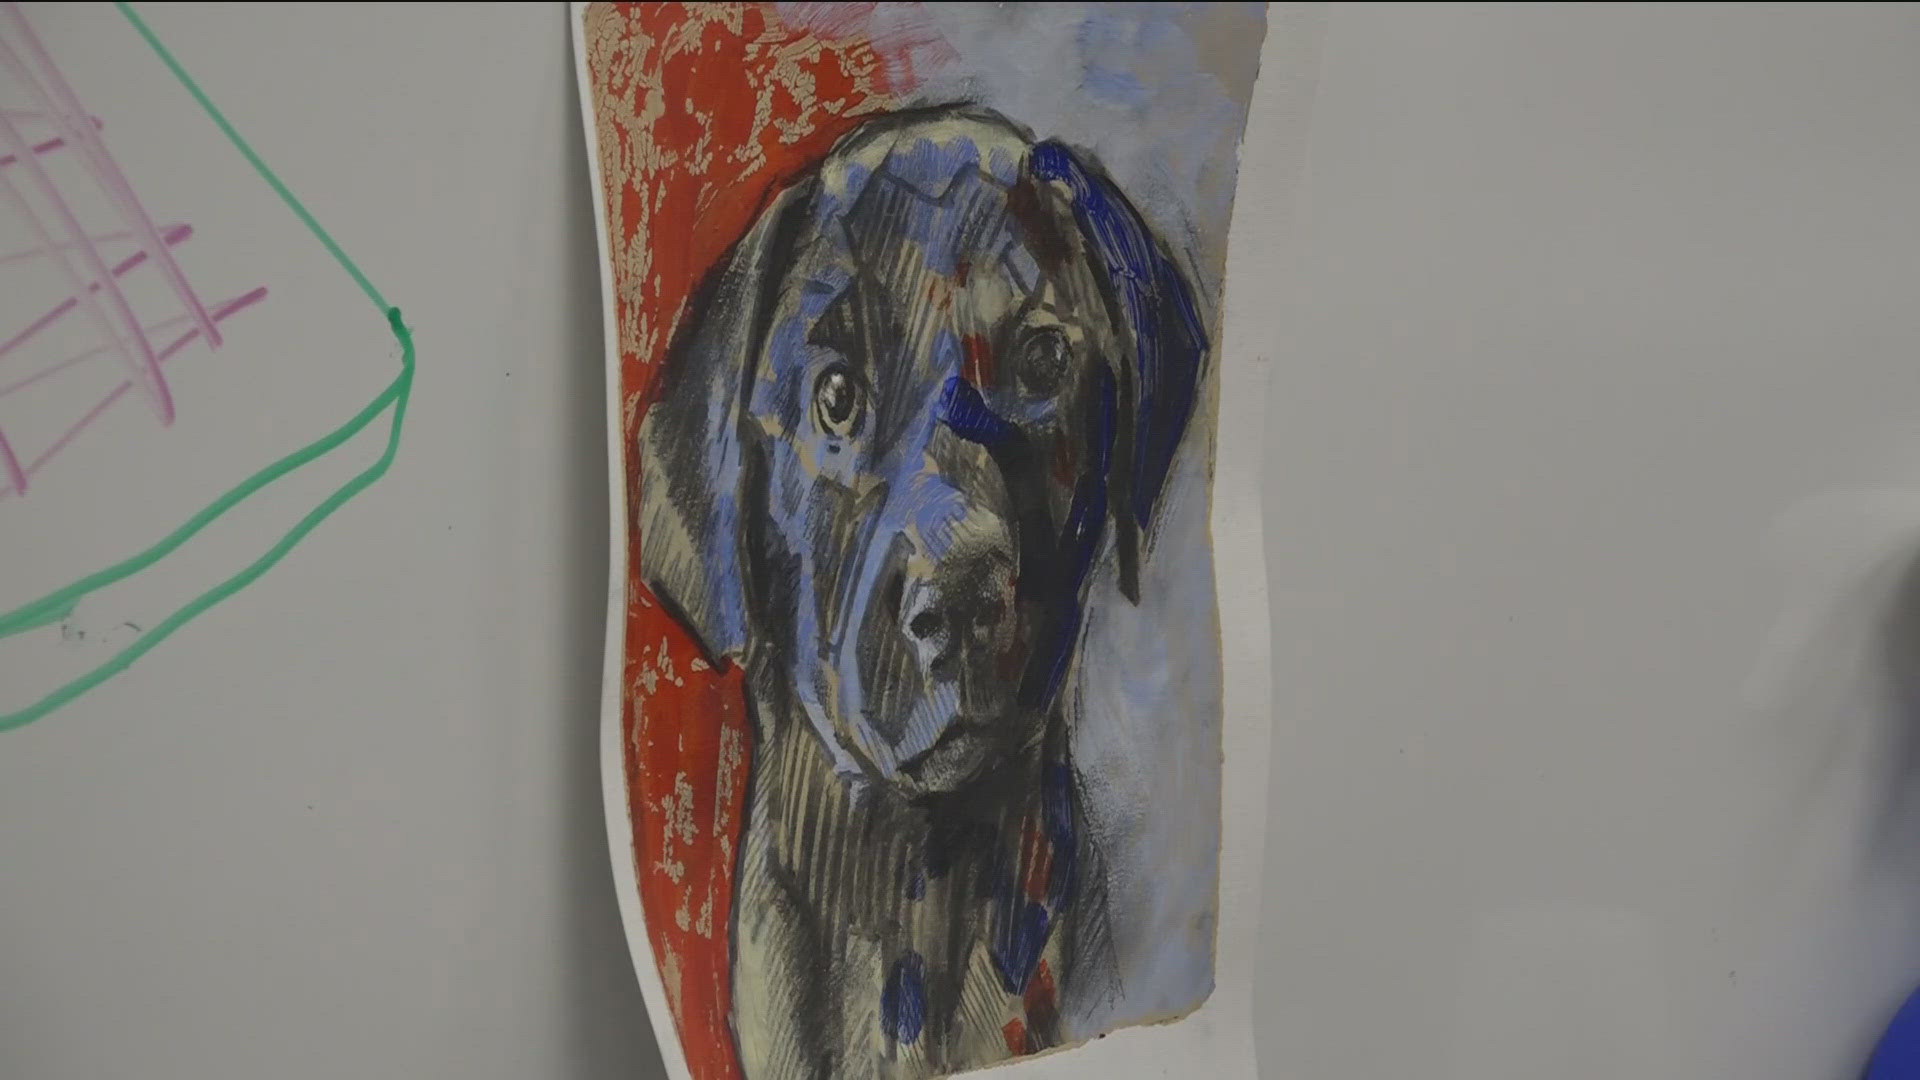 THE ARTWORK IS HELPING FURRY FRIENDS IN THE AREA FIND A FOREVER HOME...